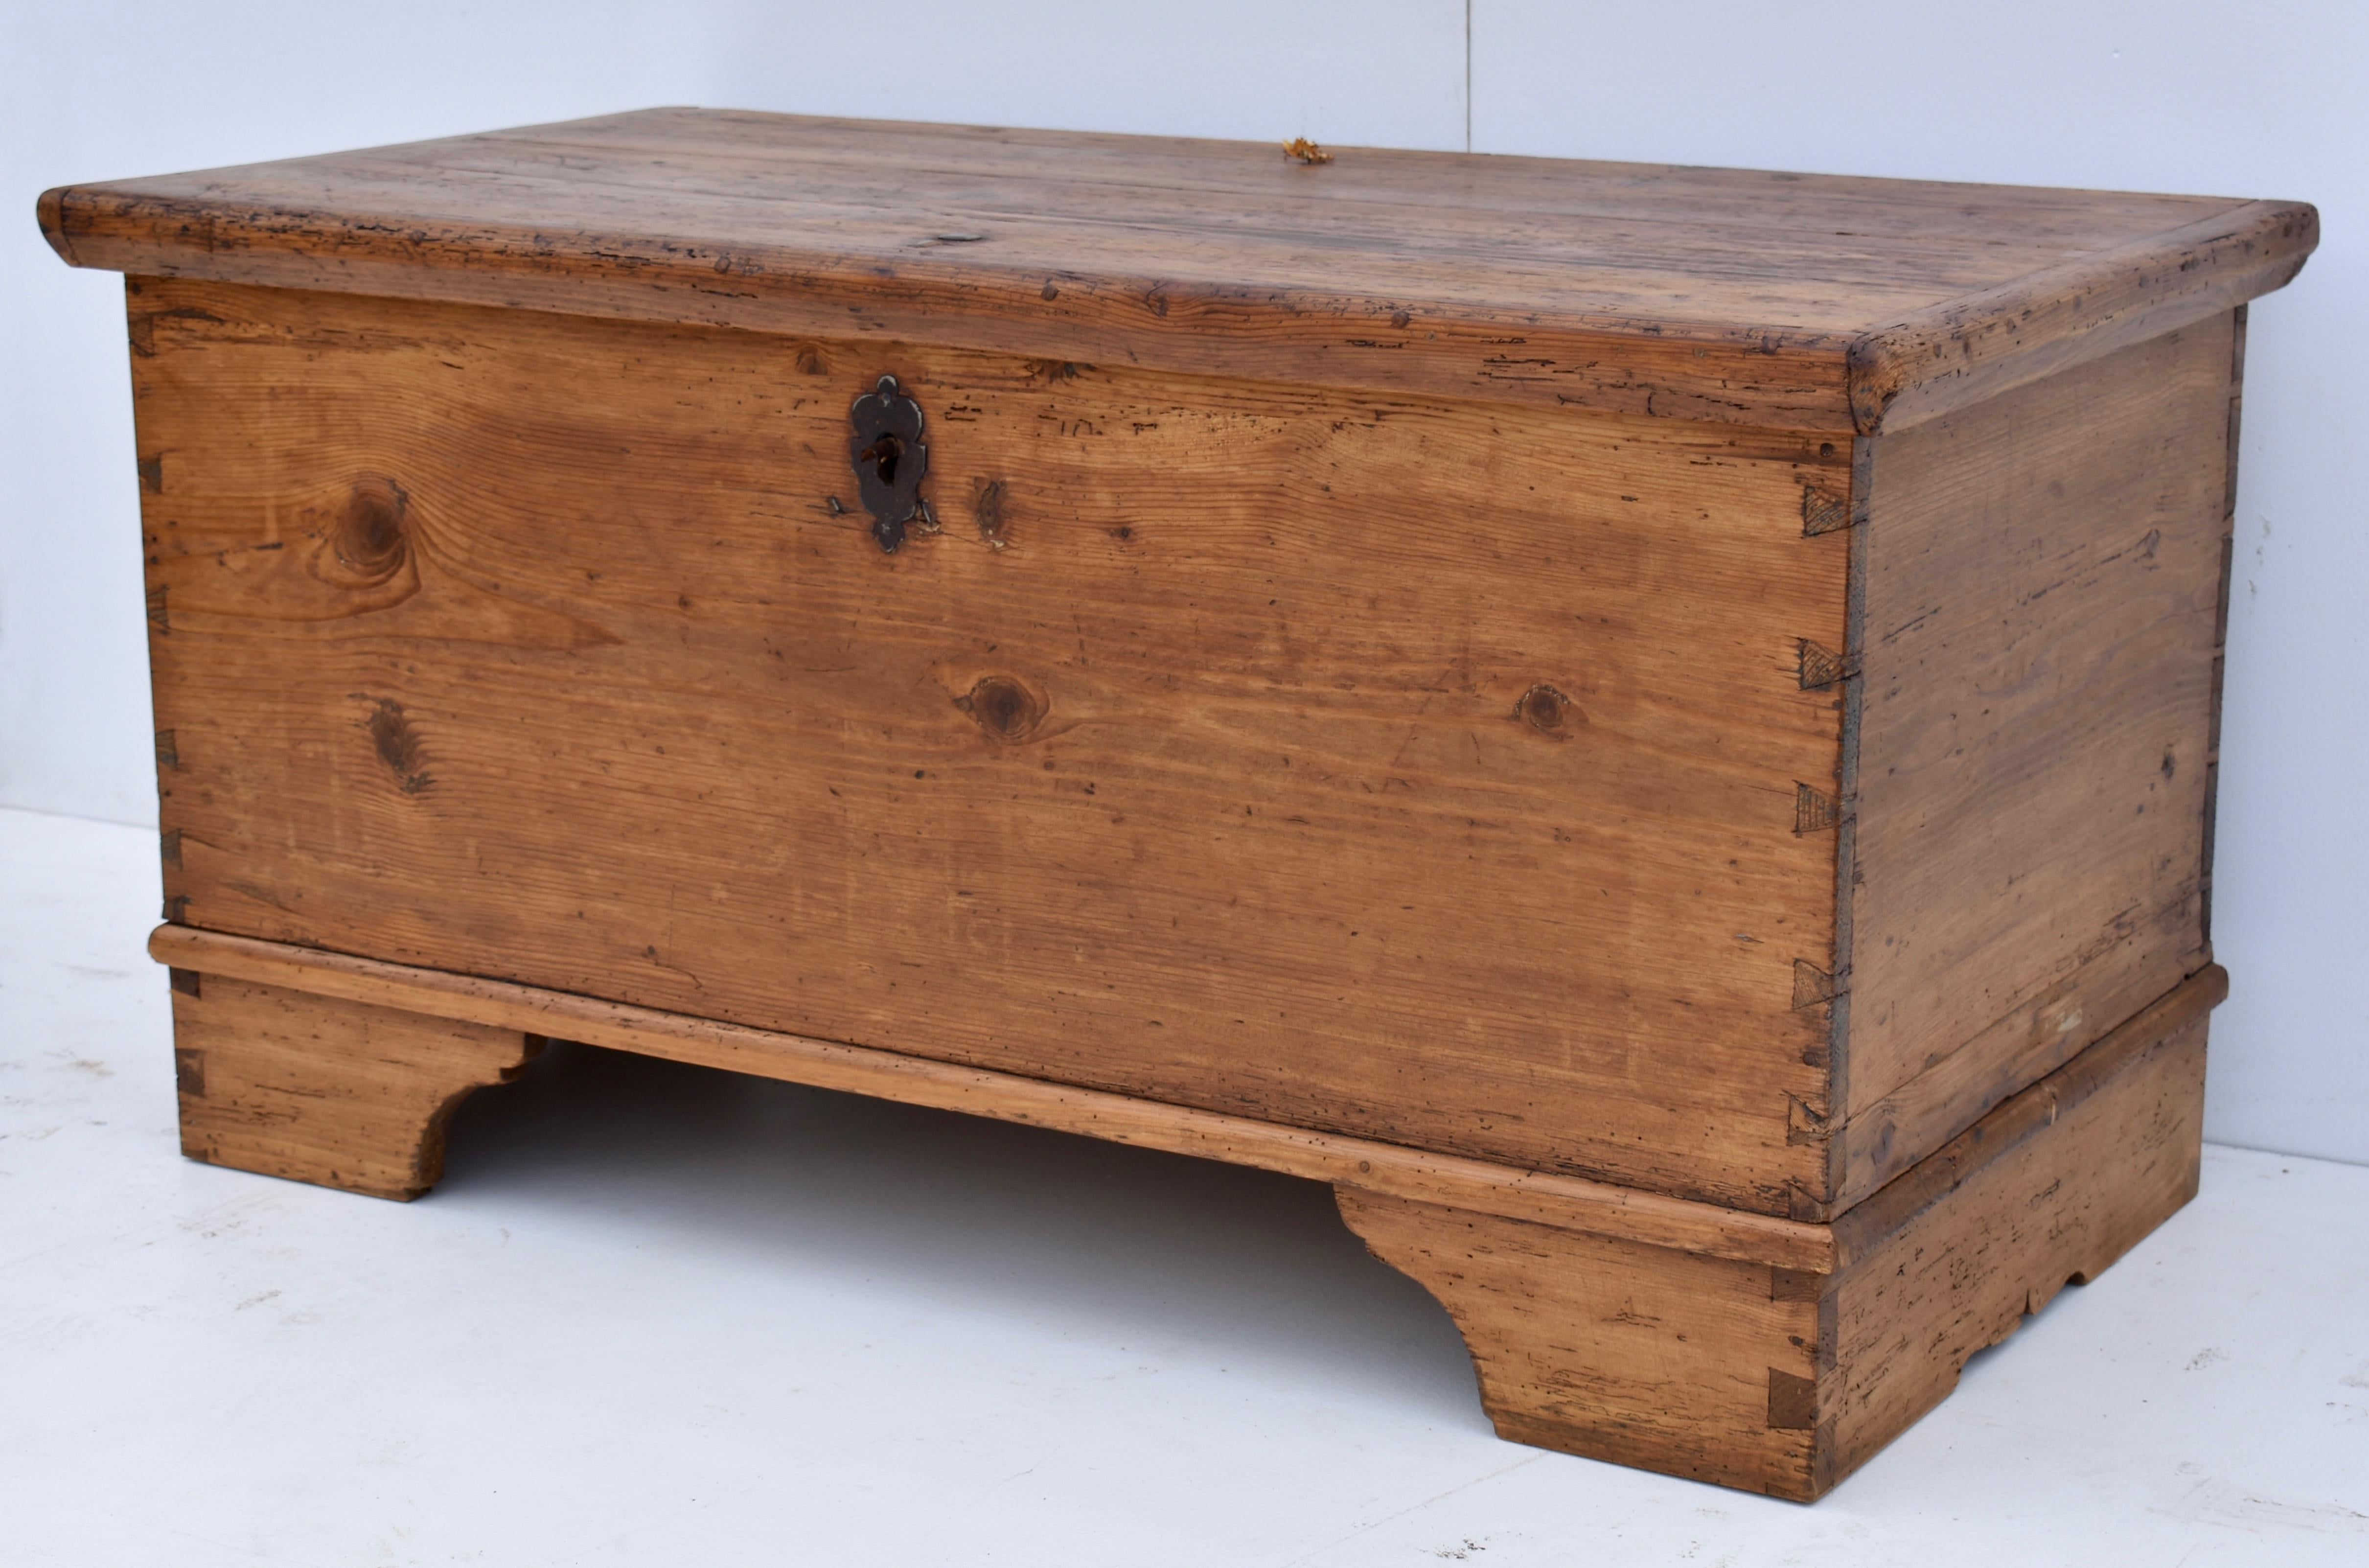 Polished Pine Dovetailed Blanket Chest with Bracket Feet